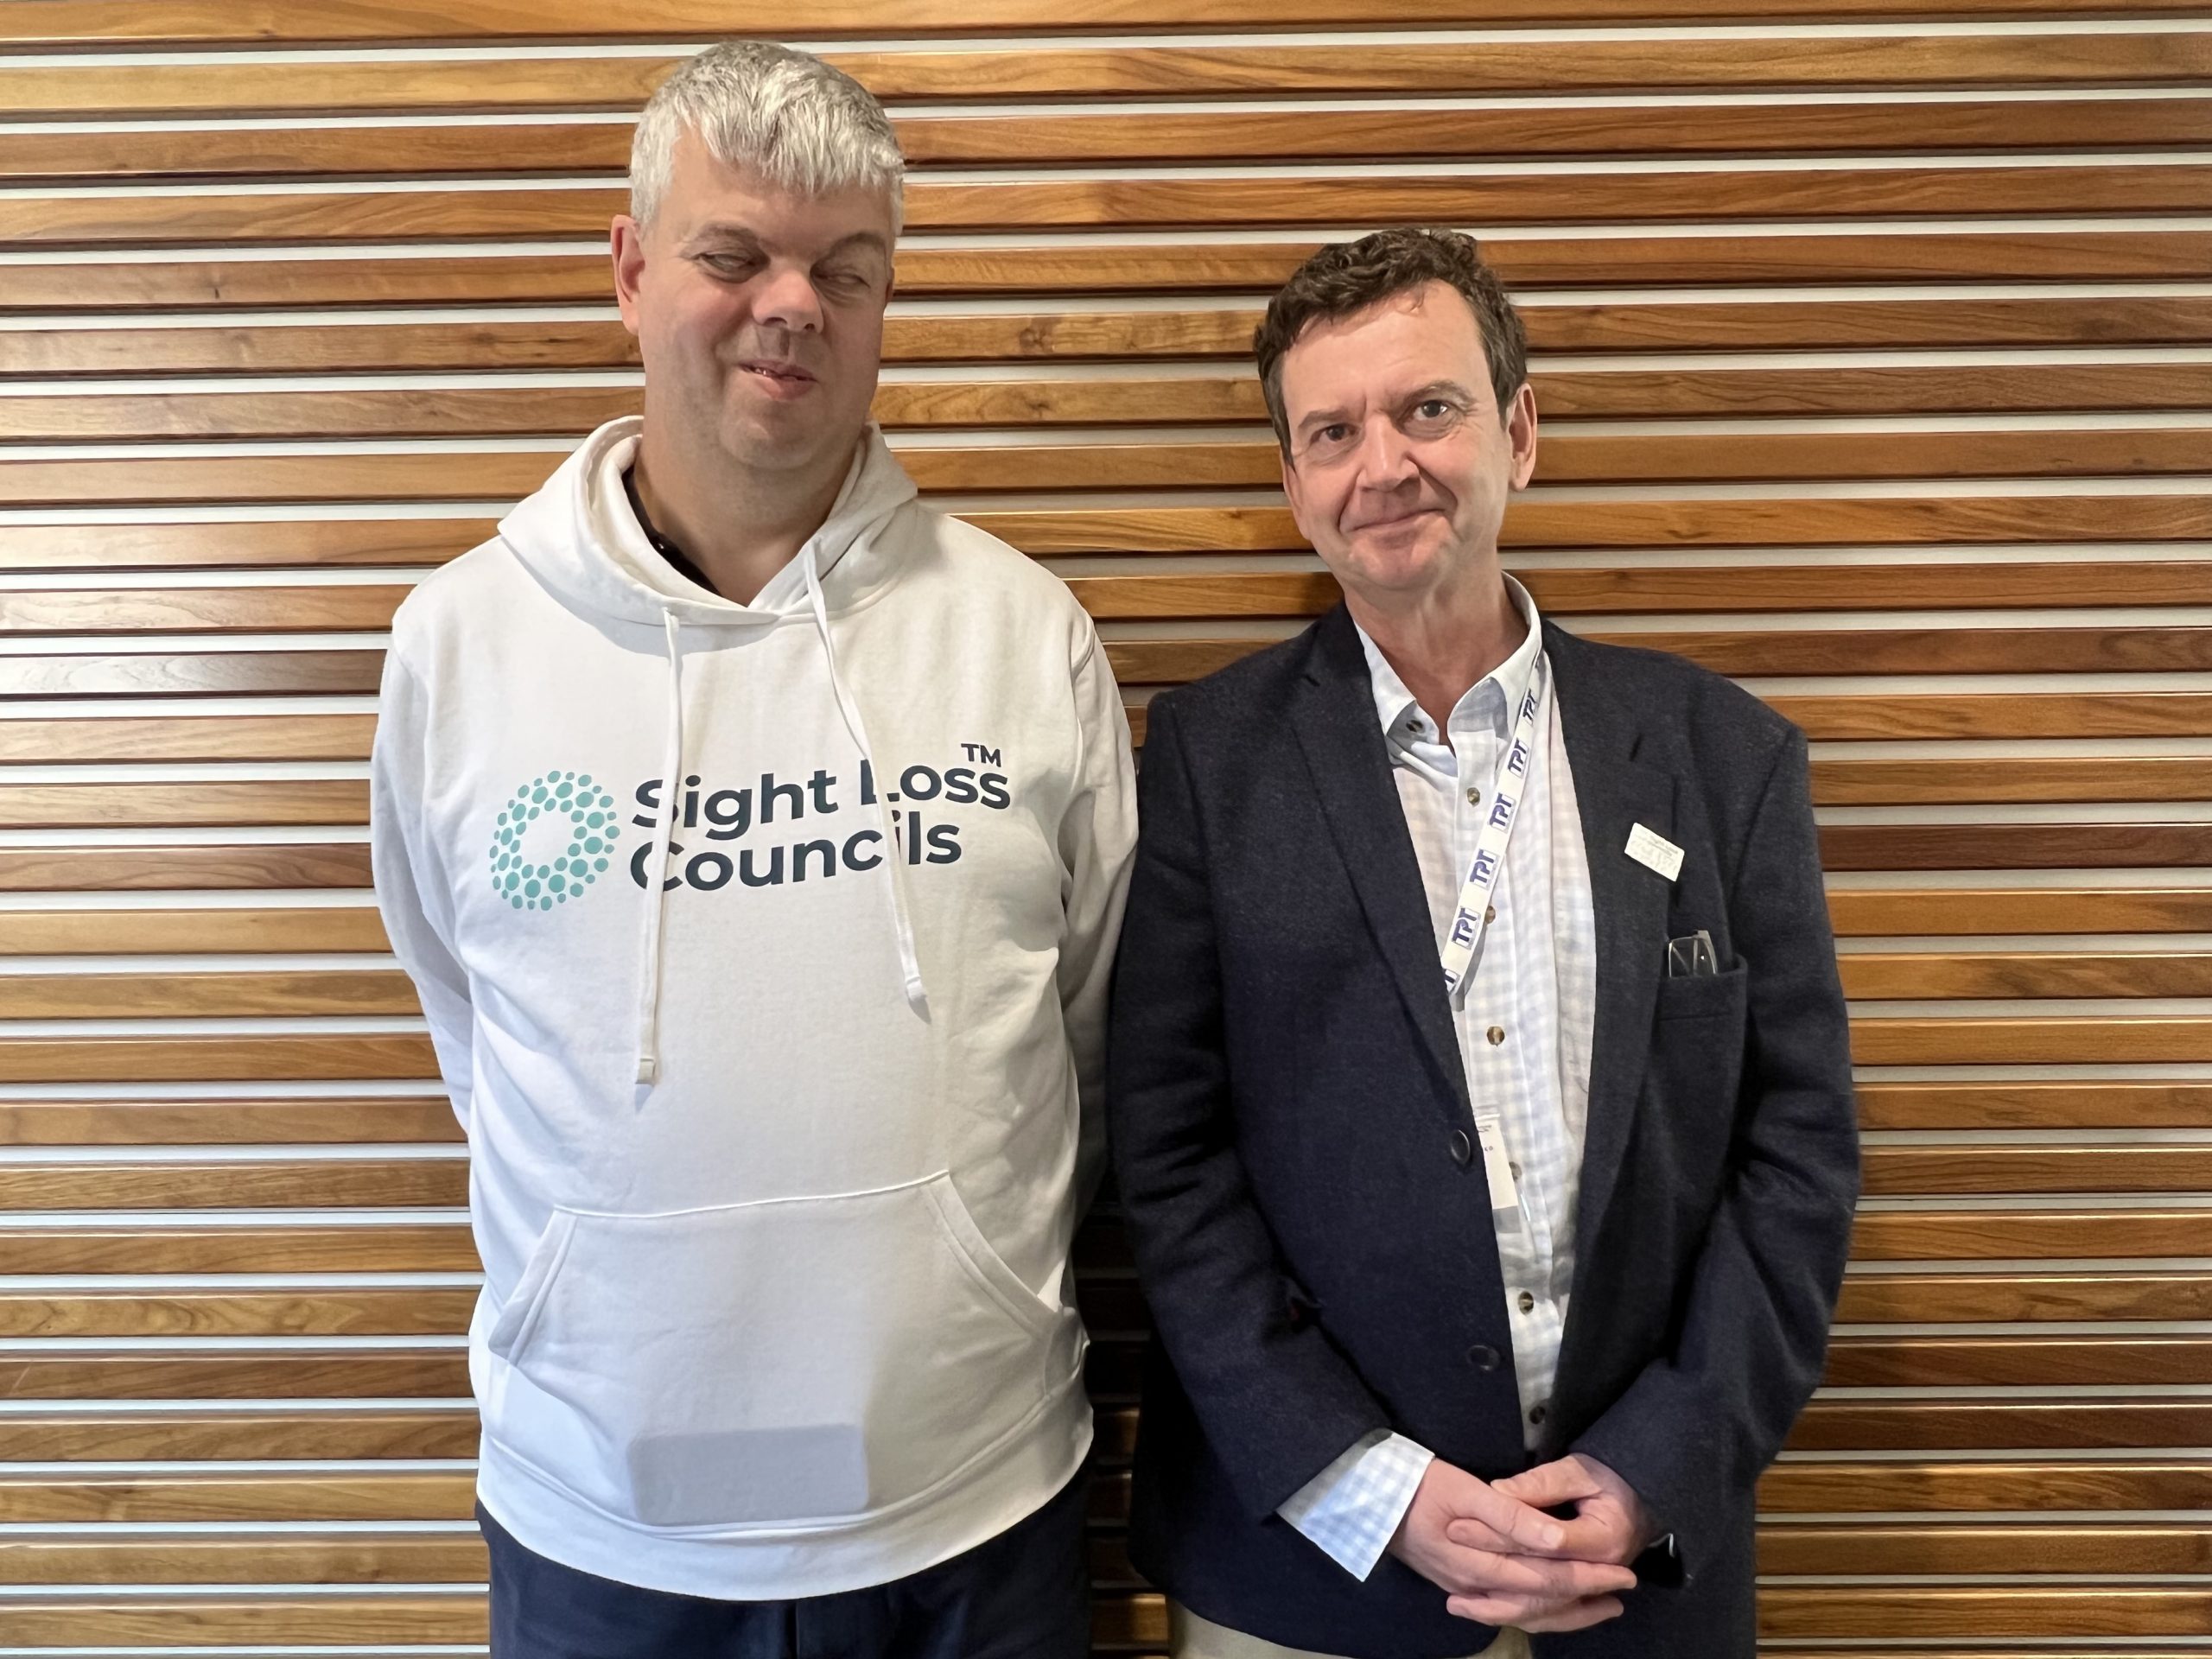 David Clarke OBE, and Charles Colquhoun, CEO of Thomas Pocklington Trust. They are stood together against a wood panelled wall, smiling at the camera. David is wearing a white SLC hoodie.